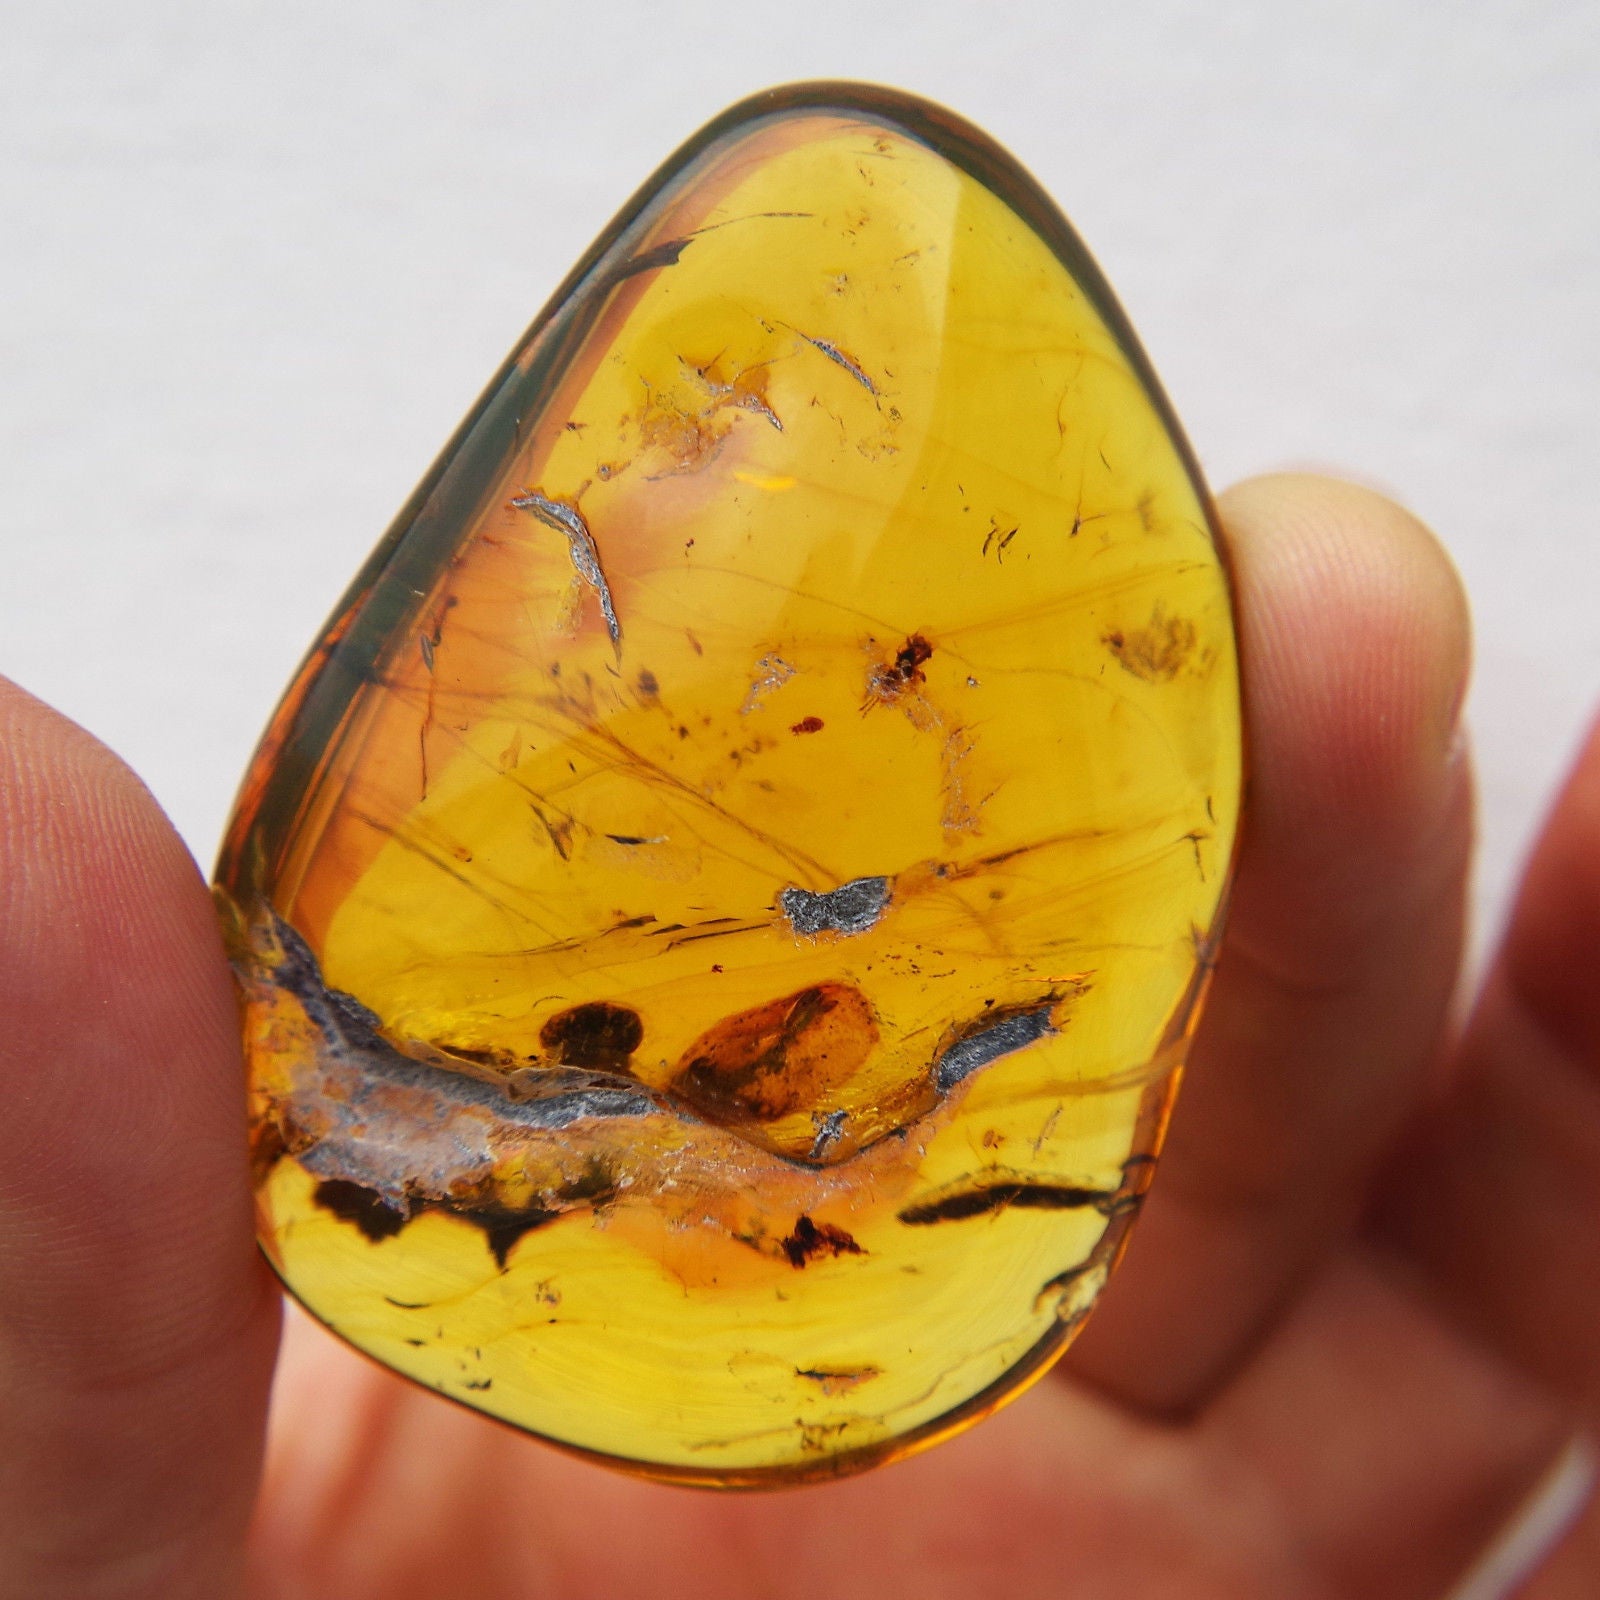 amber colored stones